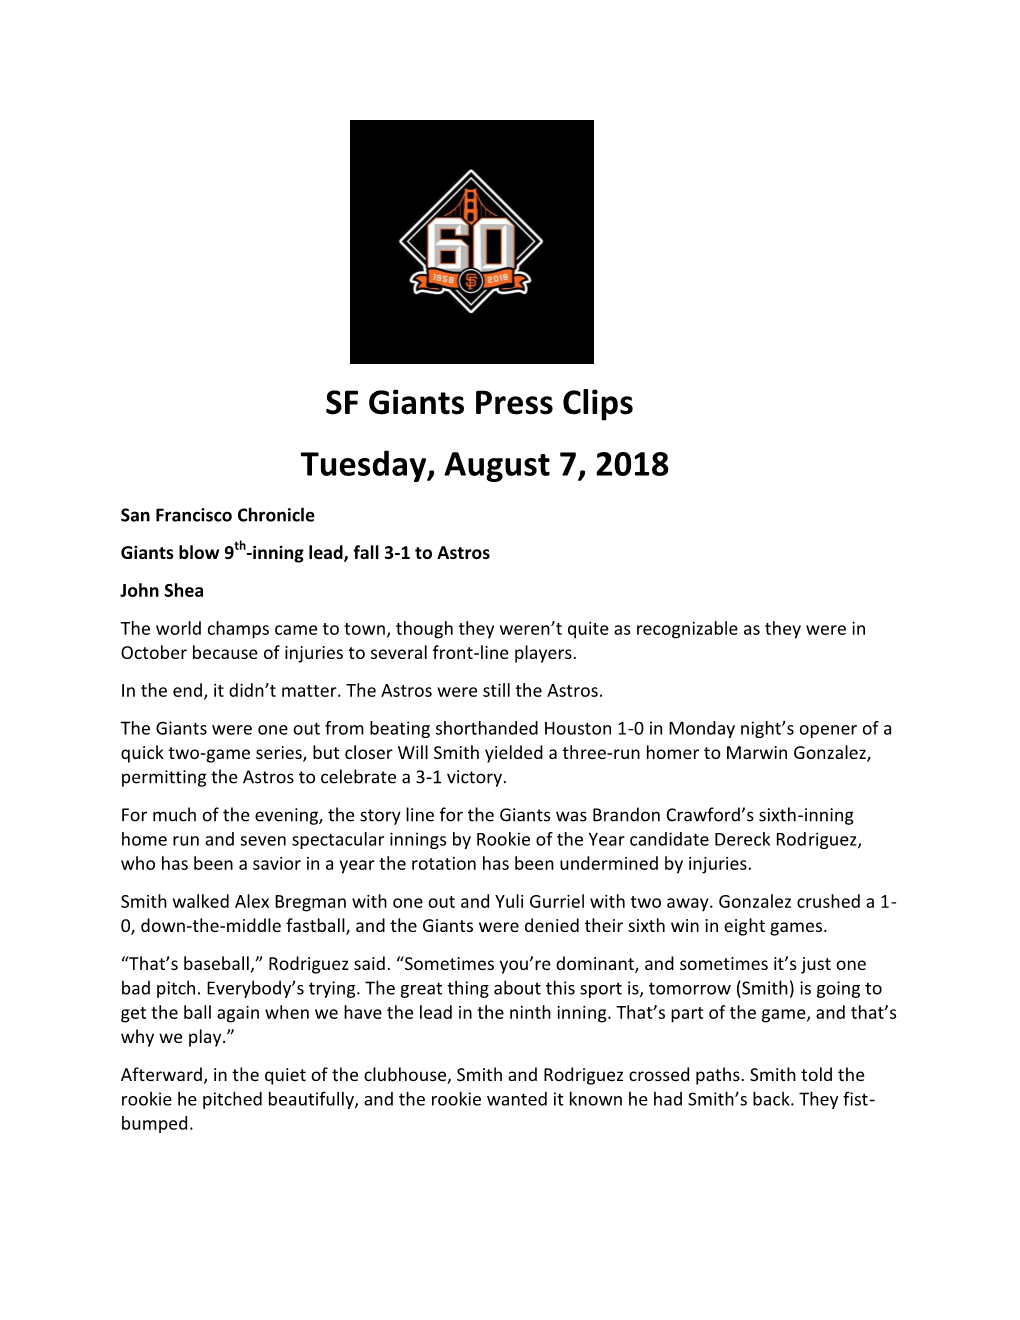 SF Giants Press Clips Tuesday, August 7, 2018